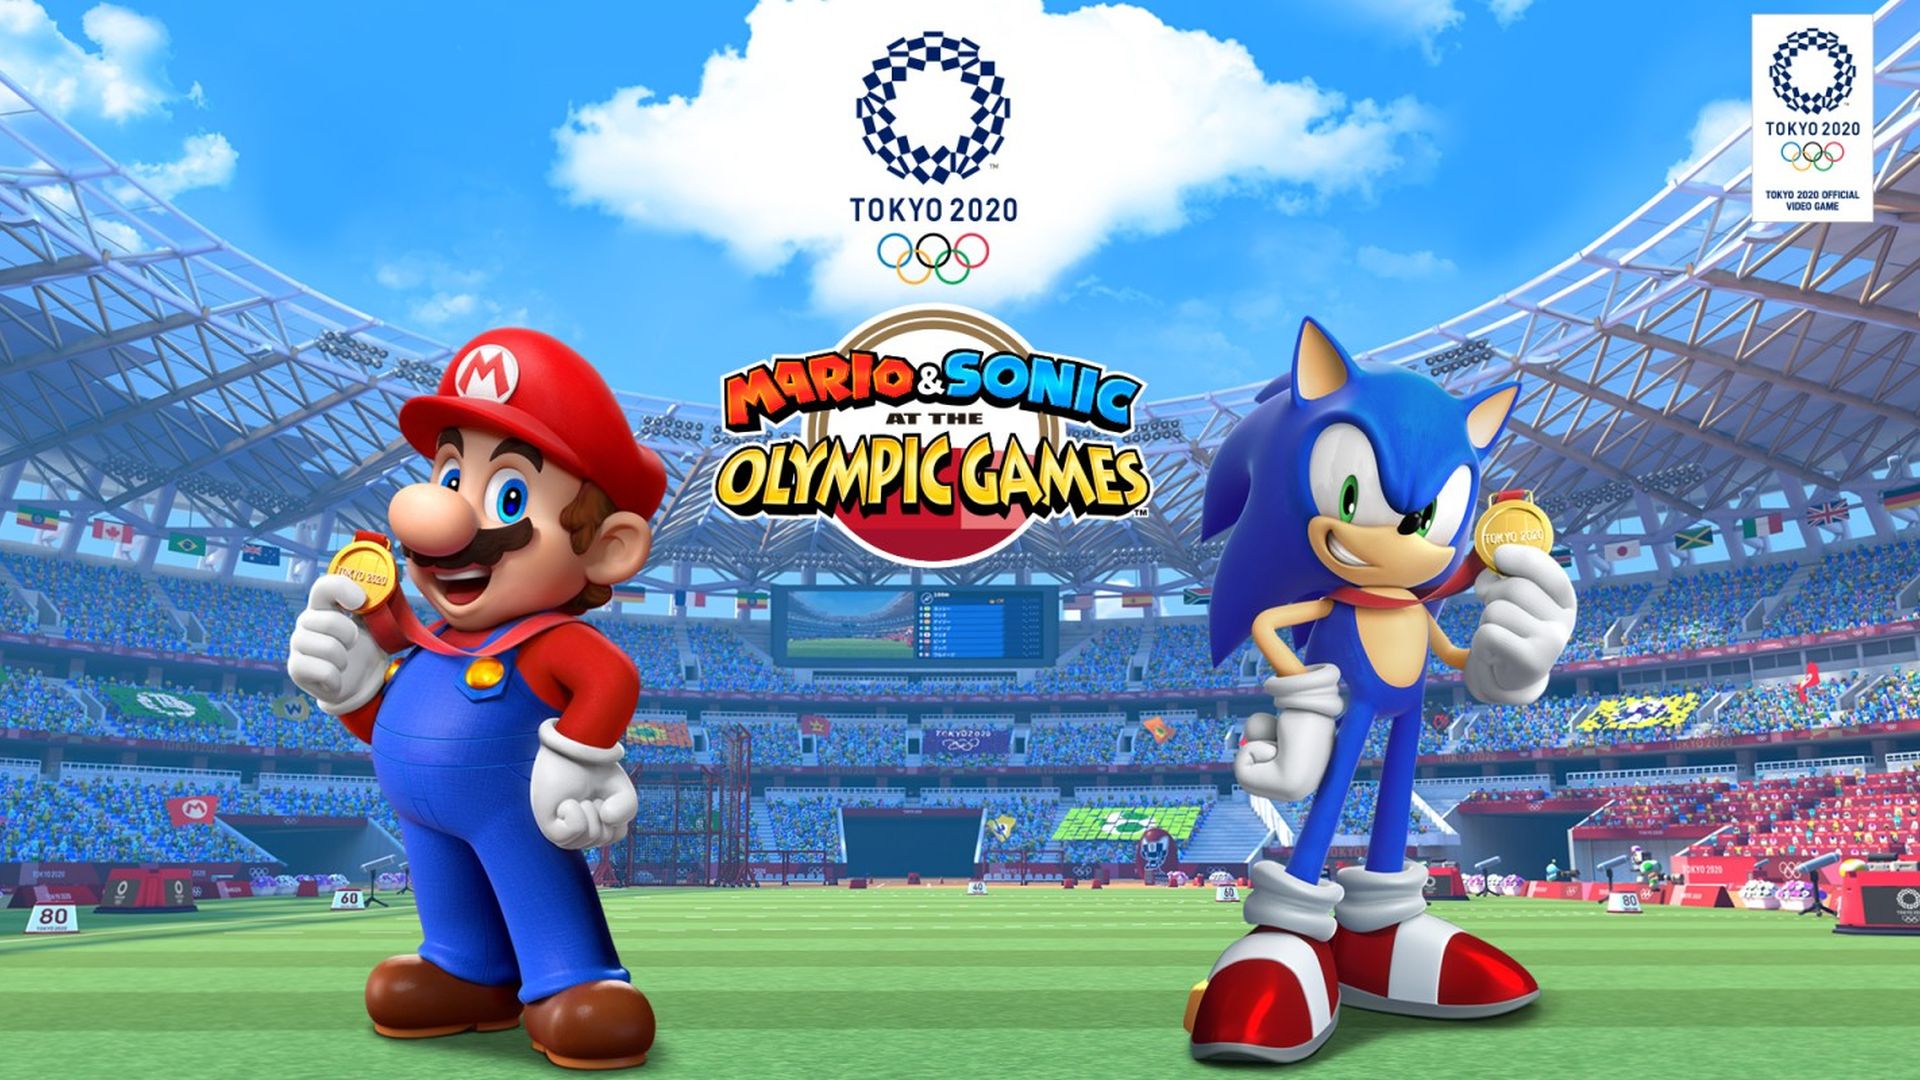 Mario & Sonic at the Olympic Games Tokyo 2020 Trailer Reveals Dream Events